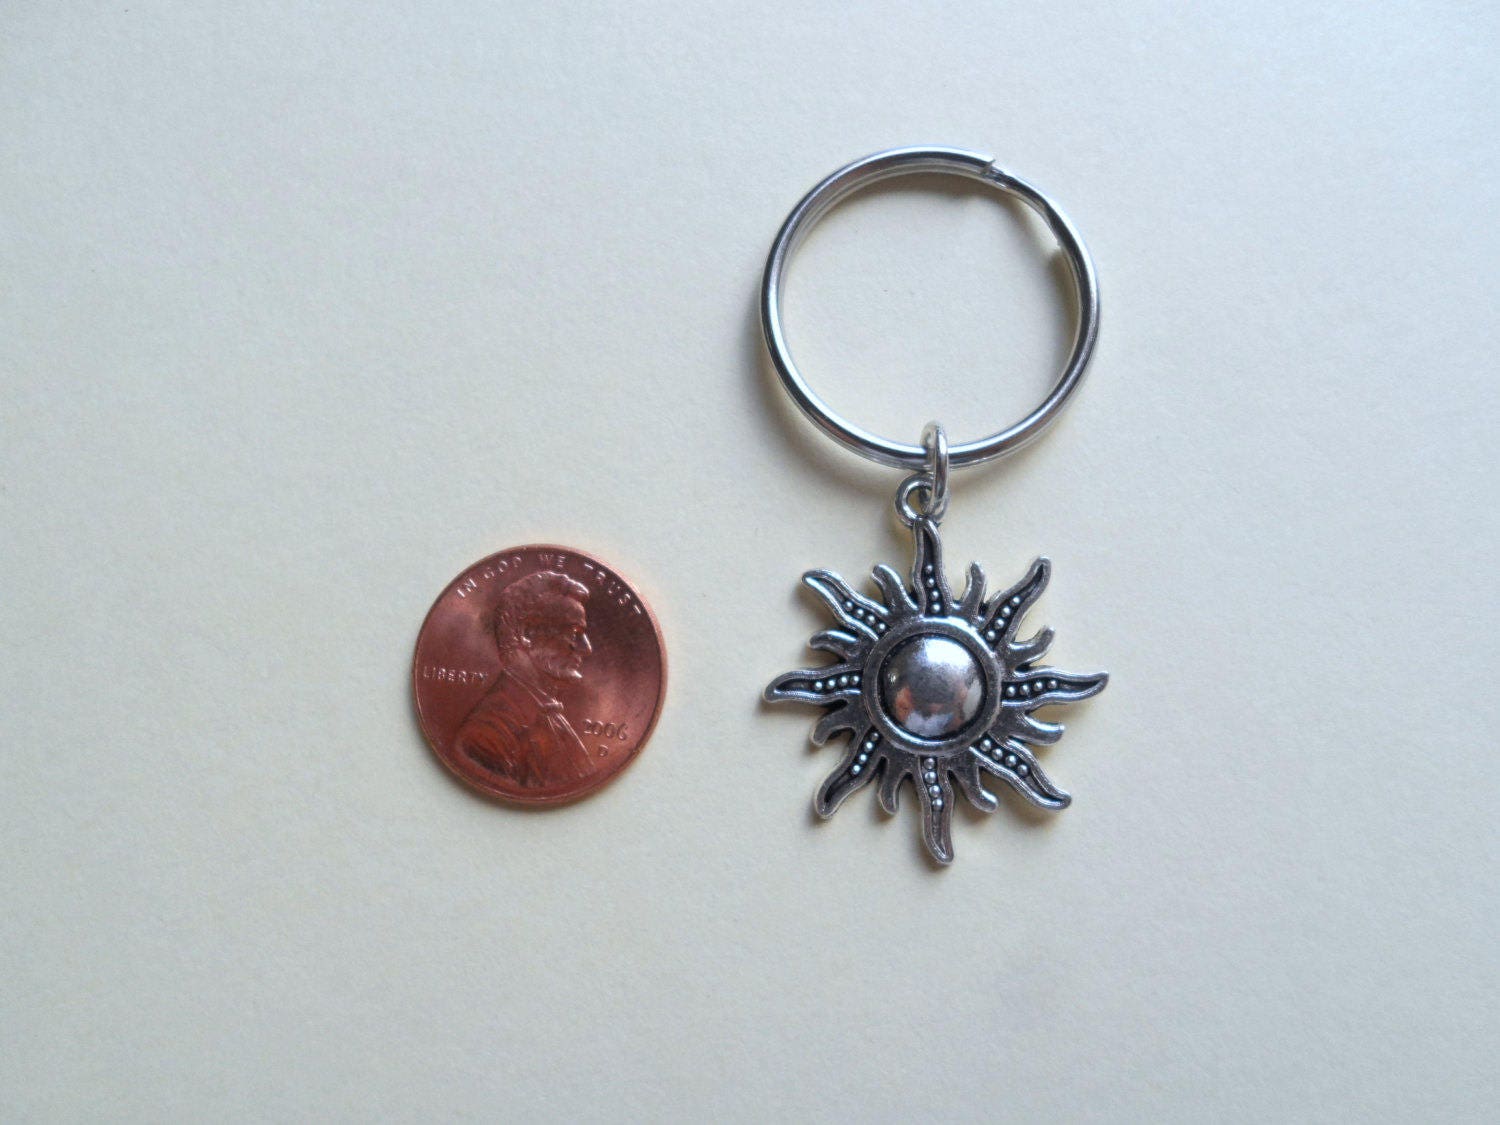 Sun and moon keychain, secret santa gift for coworker, sun and moon key  chain, sun and moon key ring, sun and moon gift, boho gifts for her